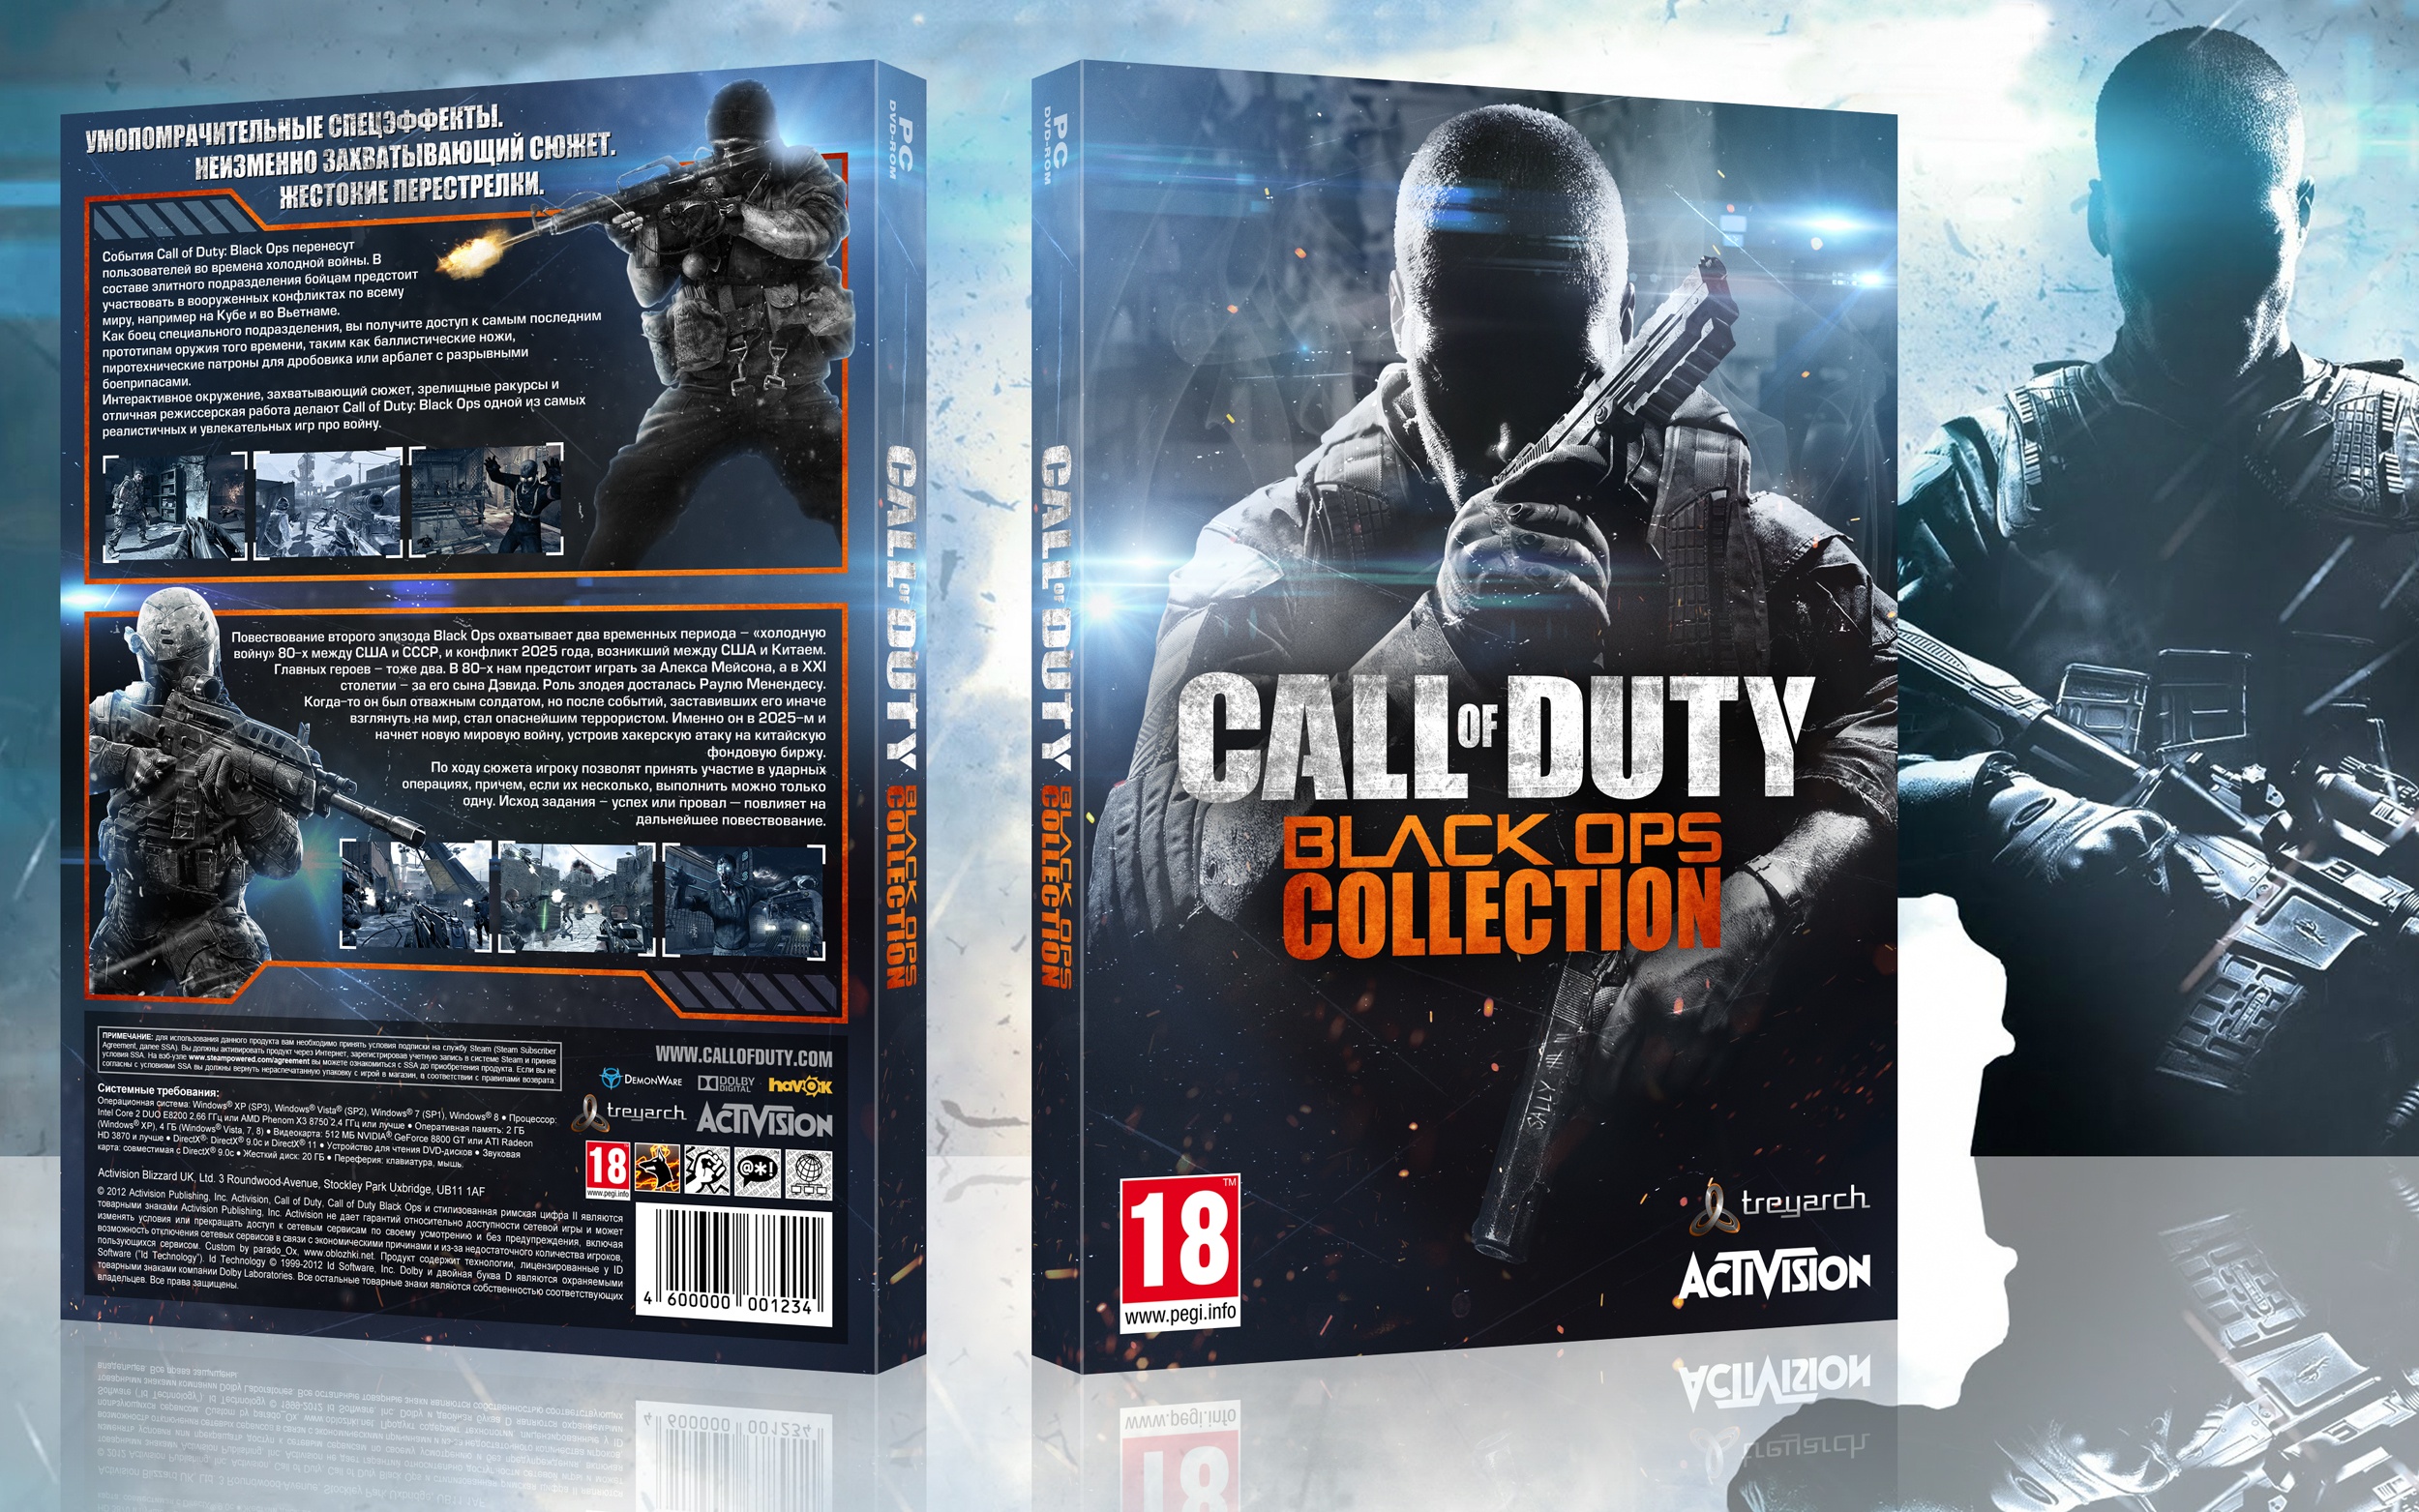 Диск игры call of duty. Call of Duty Black ops III Sony ps4 диск. Black ops 2 для PLAYSTATION 4. Call of Duty Black ops 4 диск. Call of Duty Black ops PLAYSTATION 4.